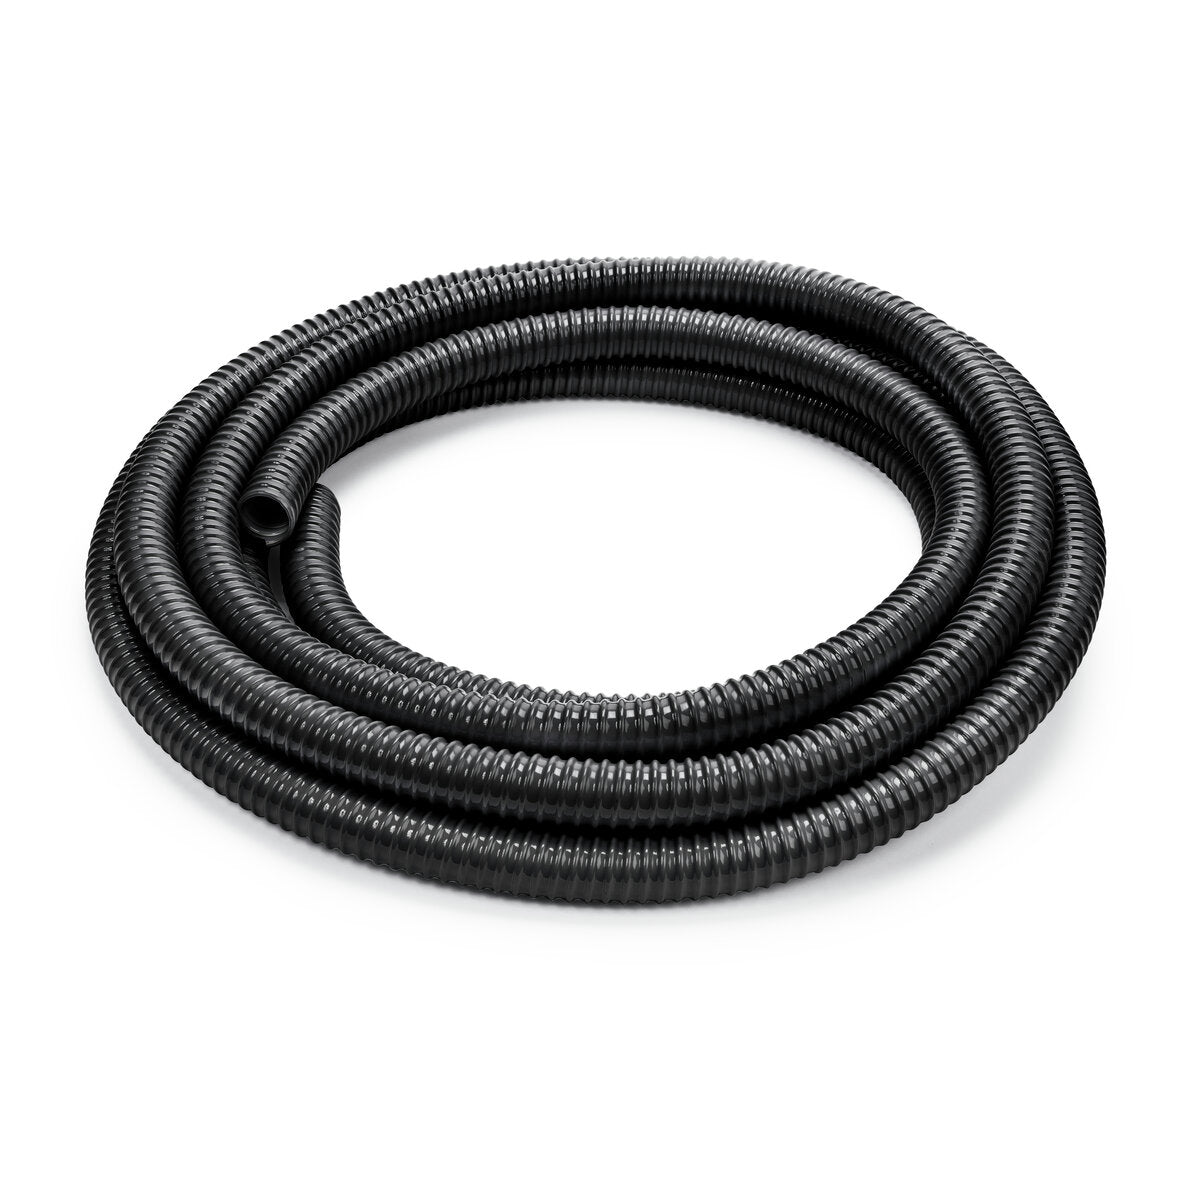 Lincoln Electric - Extraction Hose, 1 in. (25mm) Diameter (ID) x 25 ft. (7.6m) Length - K4111-25